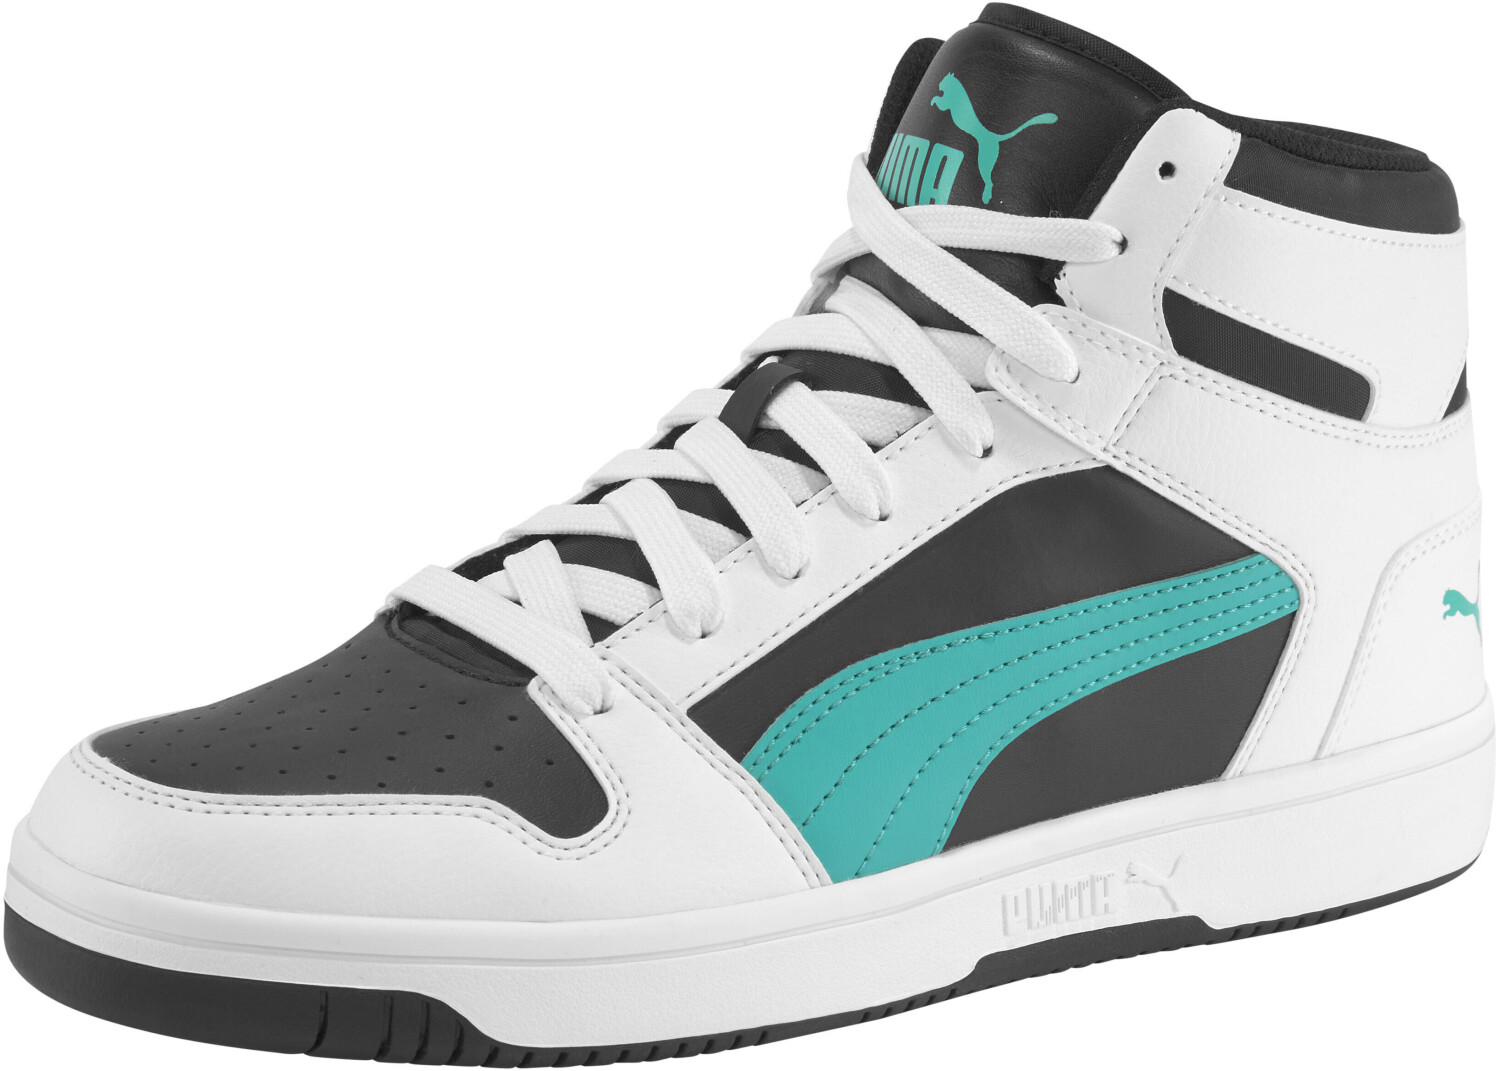 Buy Puma Rebound Lay Up from £31.41 (Today) – Best Deals on idealo.co.uk